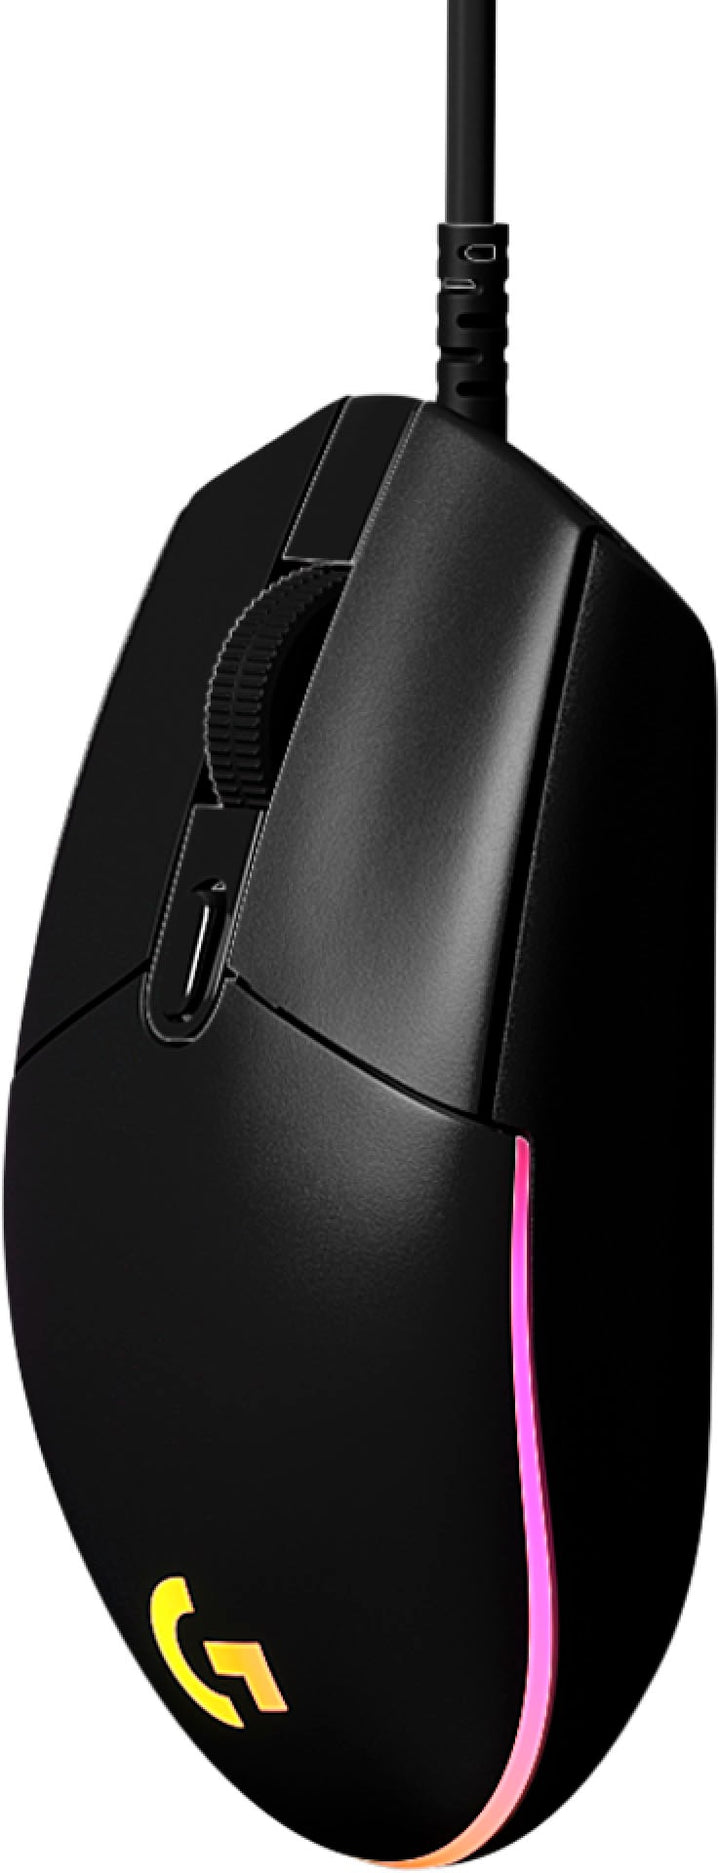 Logitech - G203 LIGHTSYNC Wired Optical Gaming Mouse with 8,000 DPI sensor - Black_7